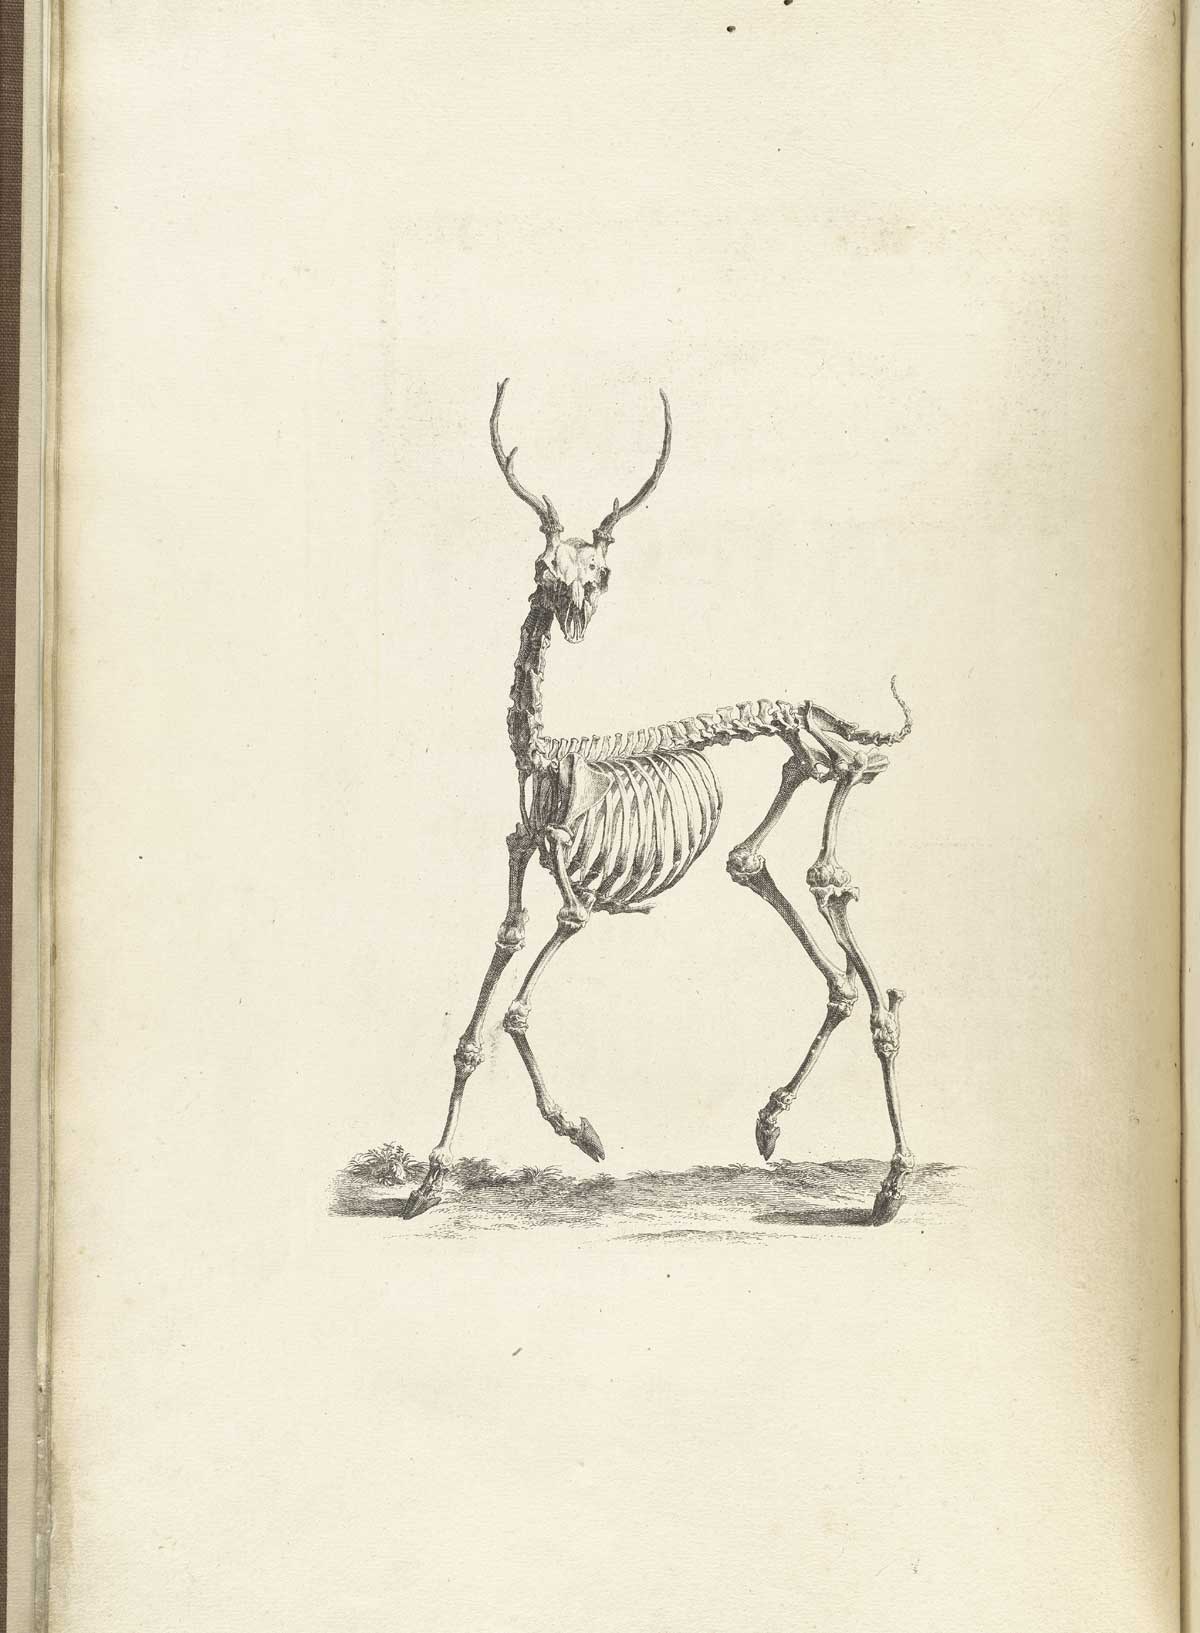 Engraving of the skeleton of a deer with small antlers as if running to the left hand side of the page; from William Cheselden’s Osteographia, NLM Call no.: WZ 260 C499o 1733.